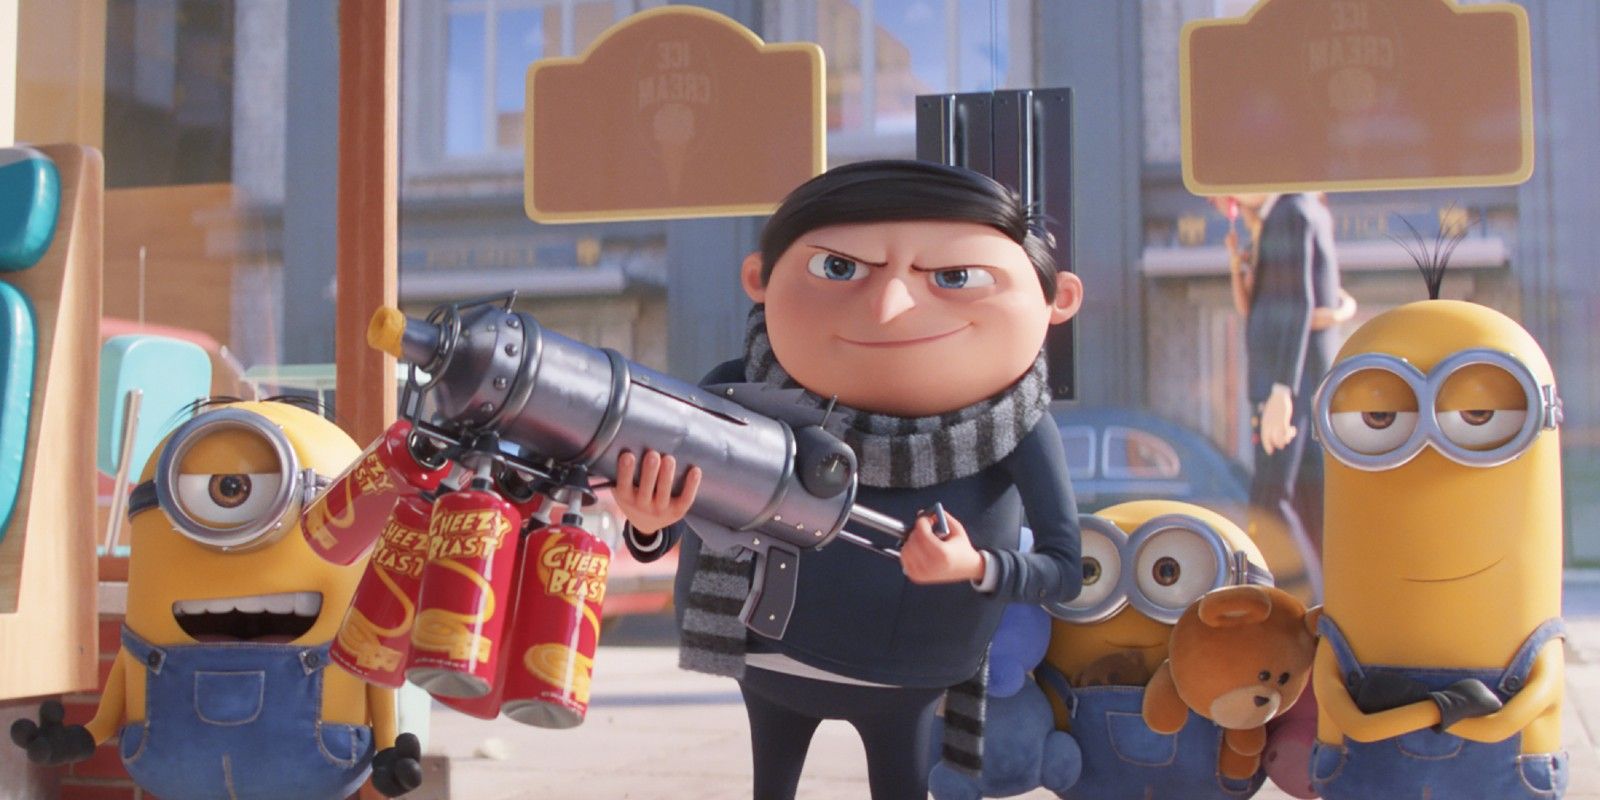 Voices of Pierre Coffin and Steve Carell in Minions The Rise of Gru 2